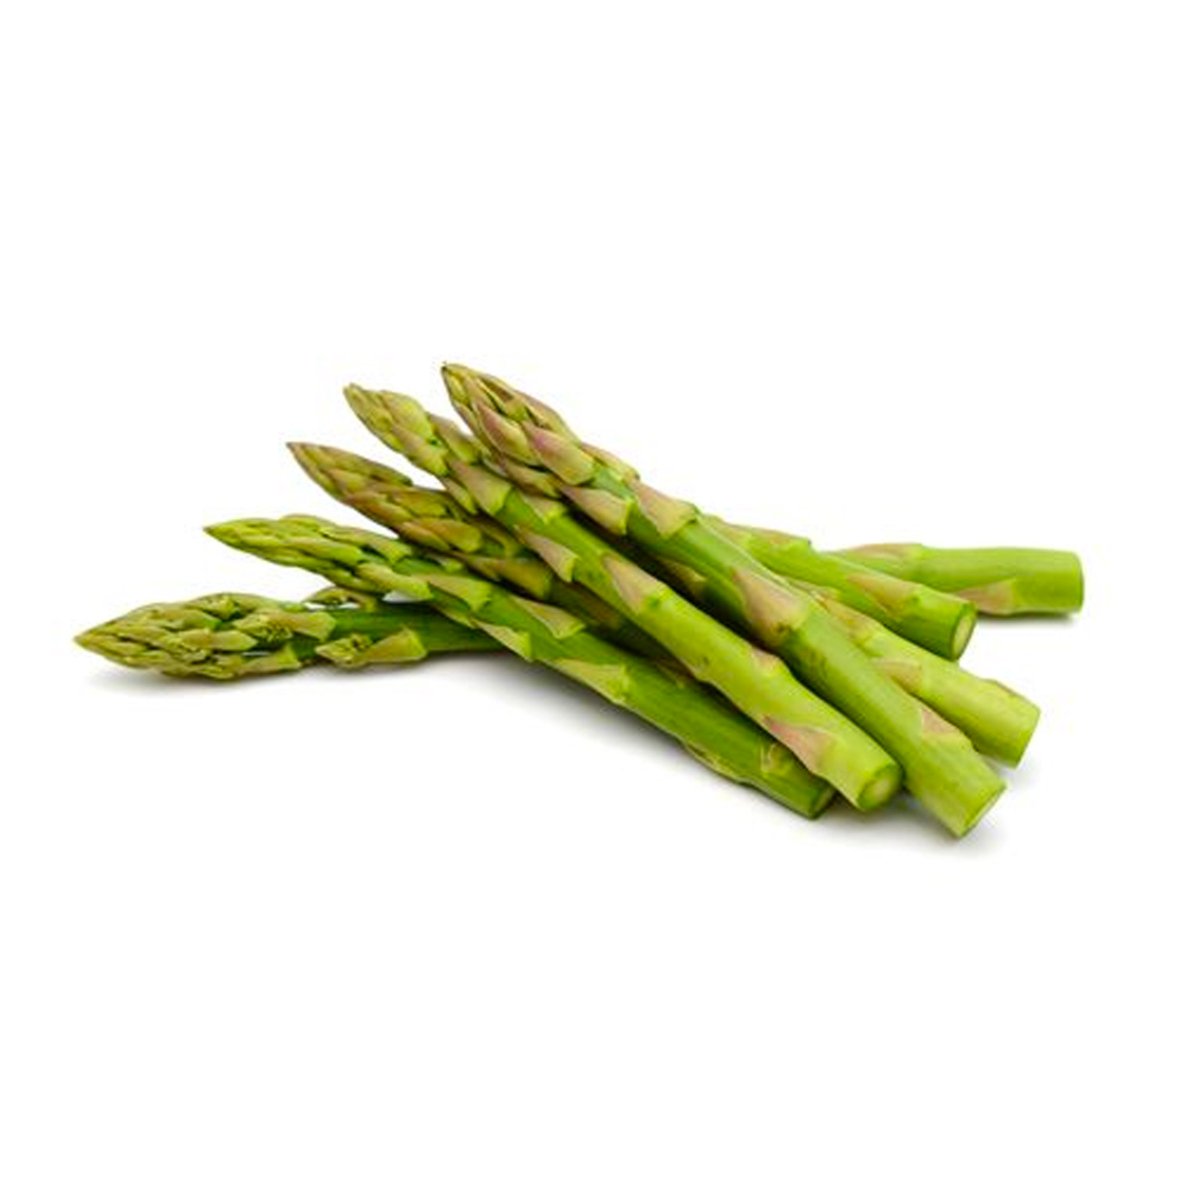 Asparagus 250g ApproX Weight